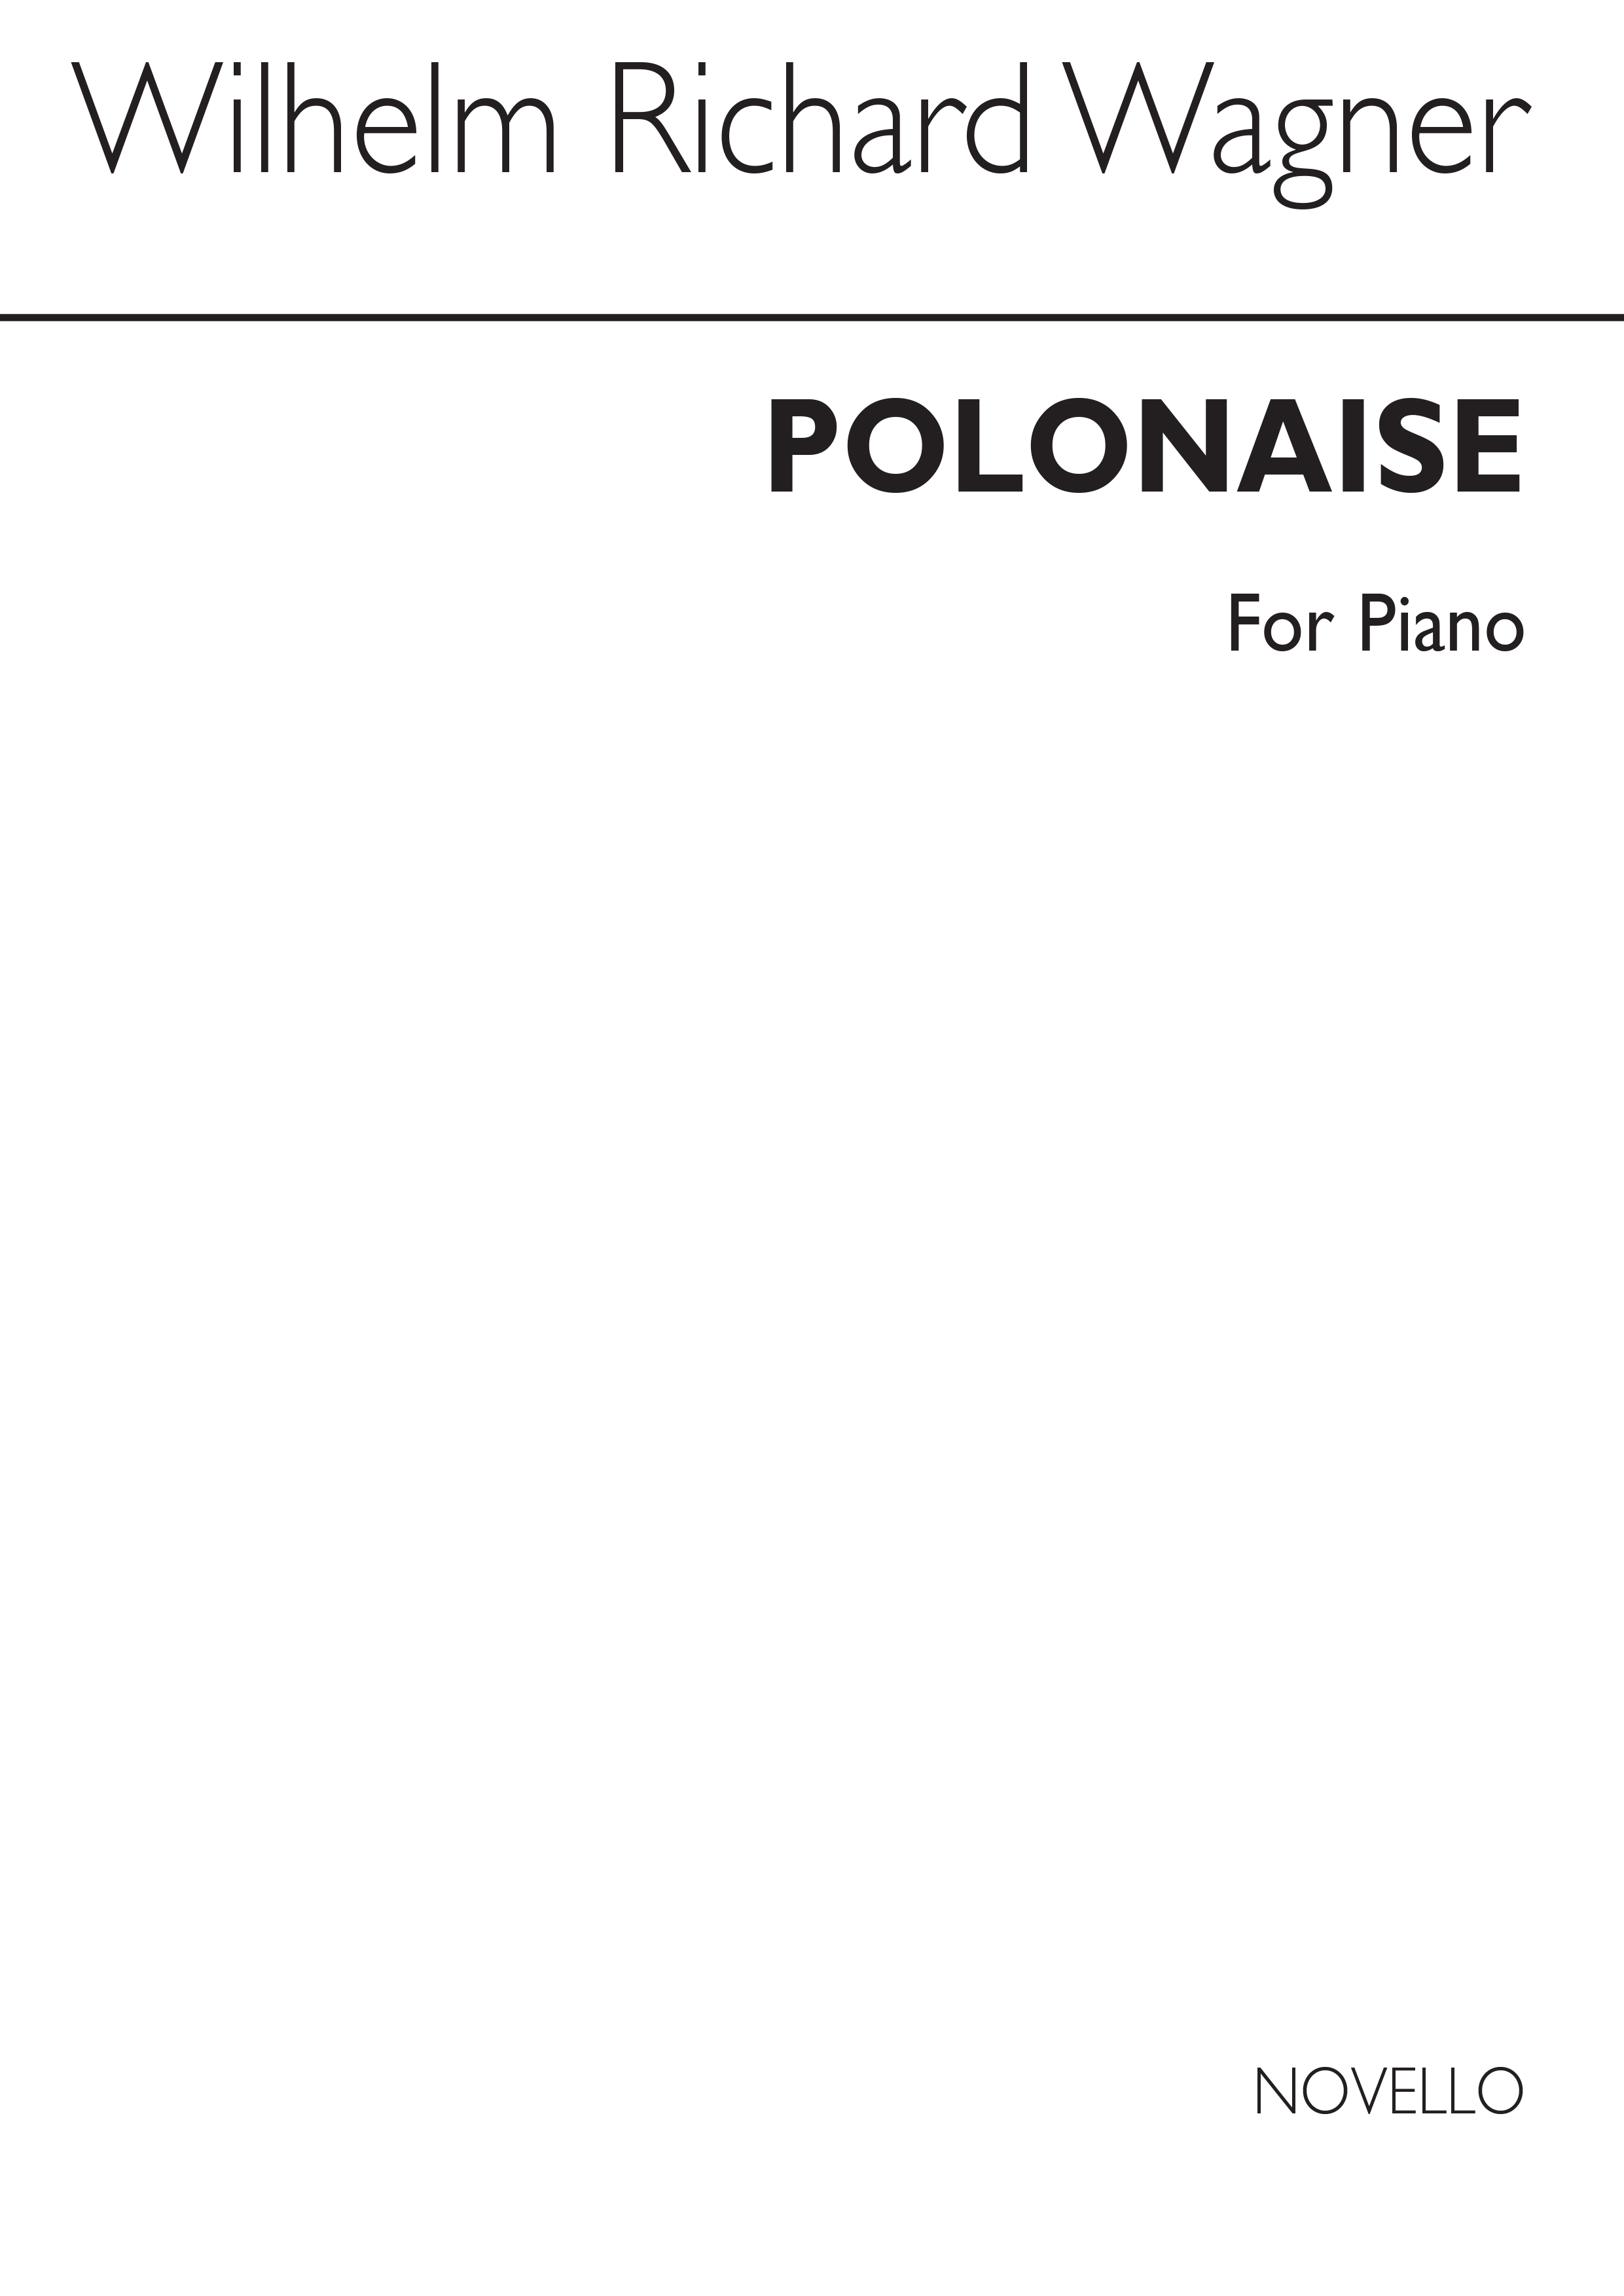 Richard Wagner: Polonaise for Piano: Piano: Instrumental Work